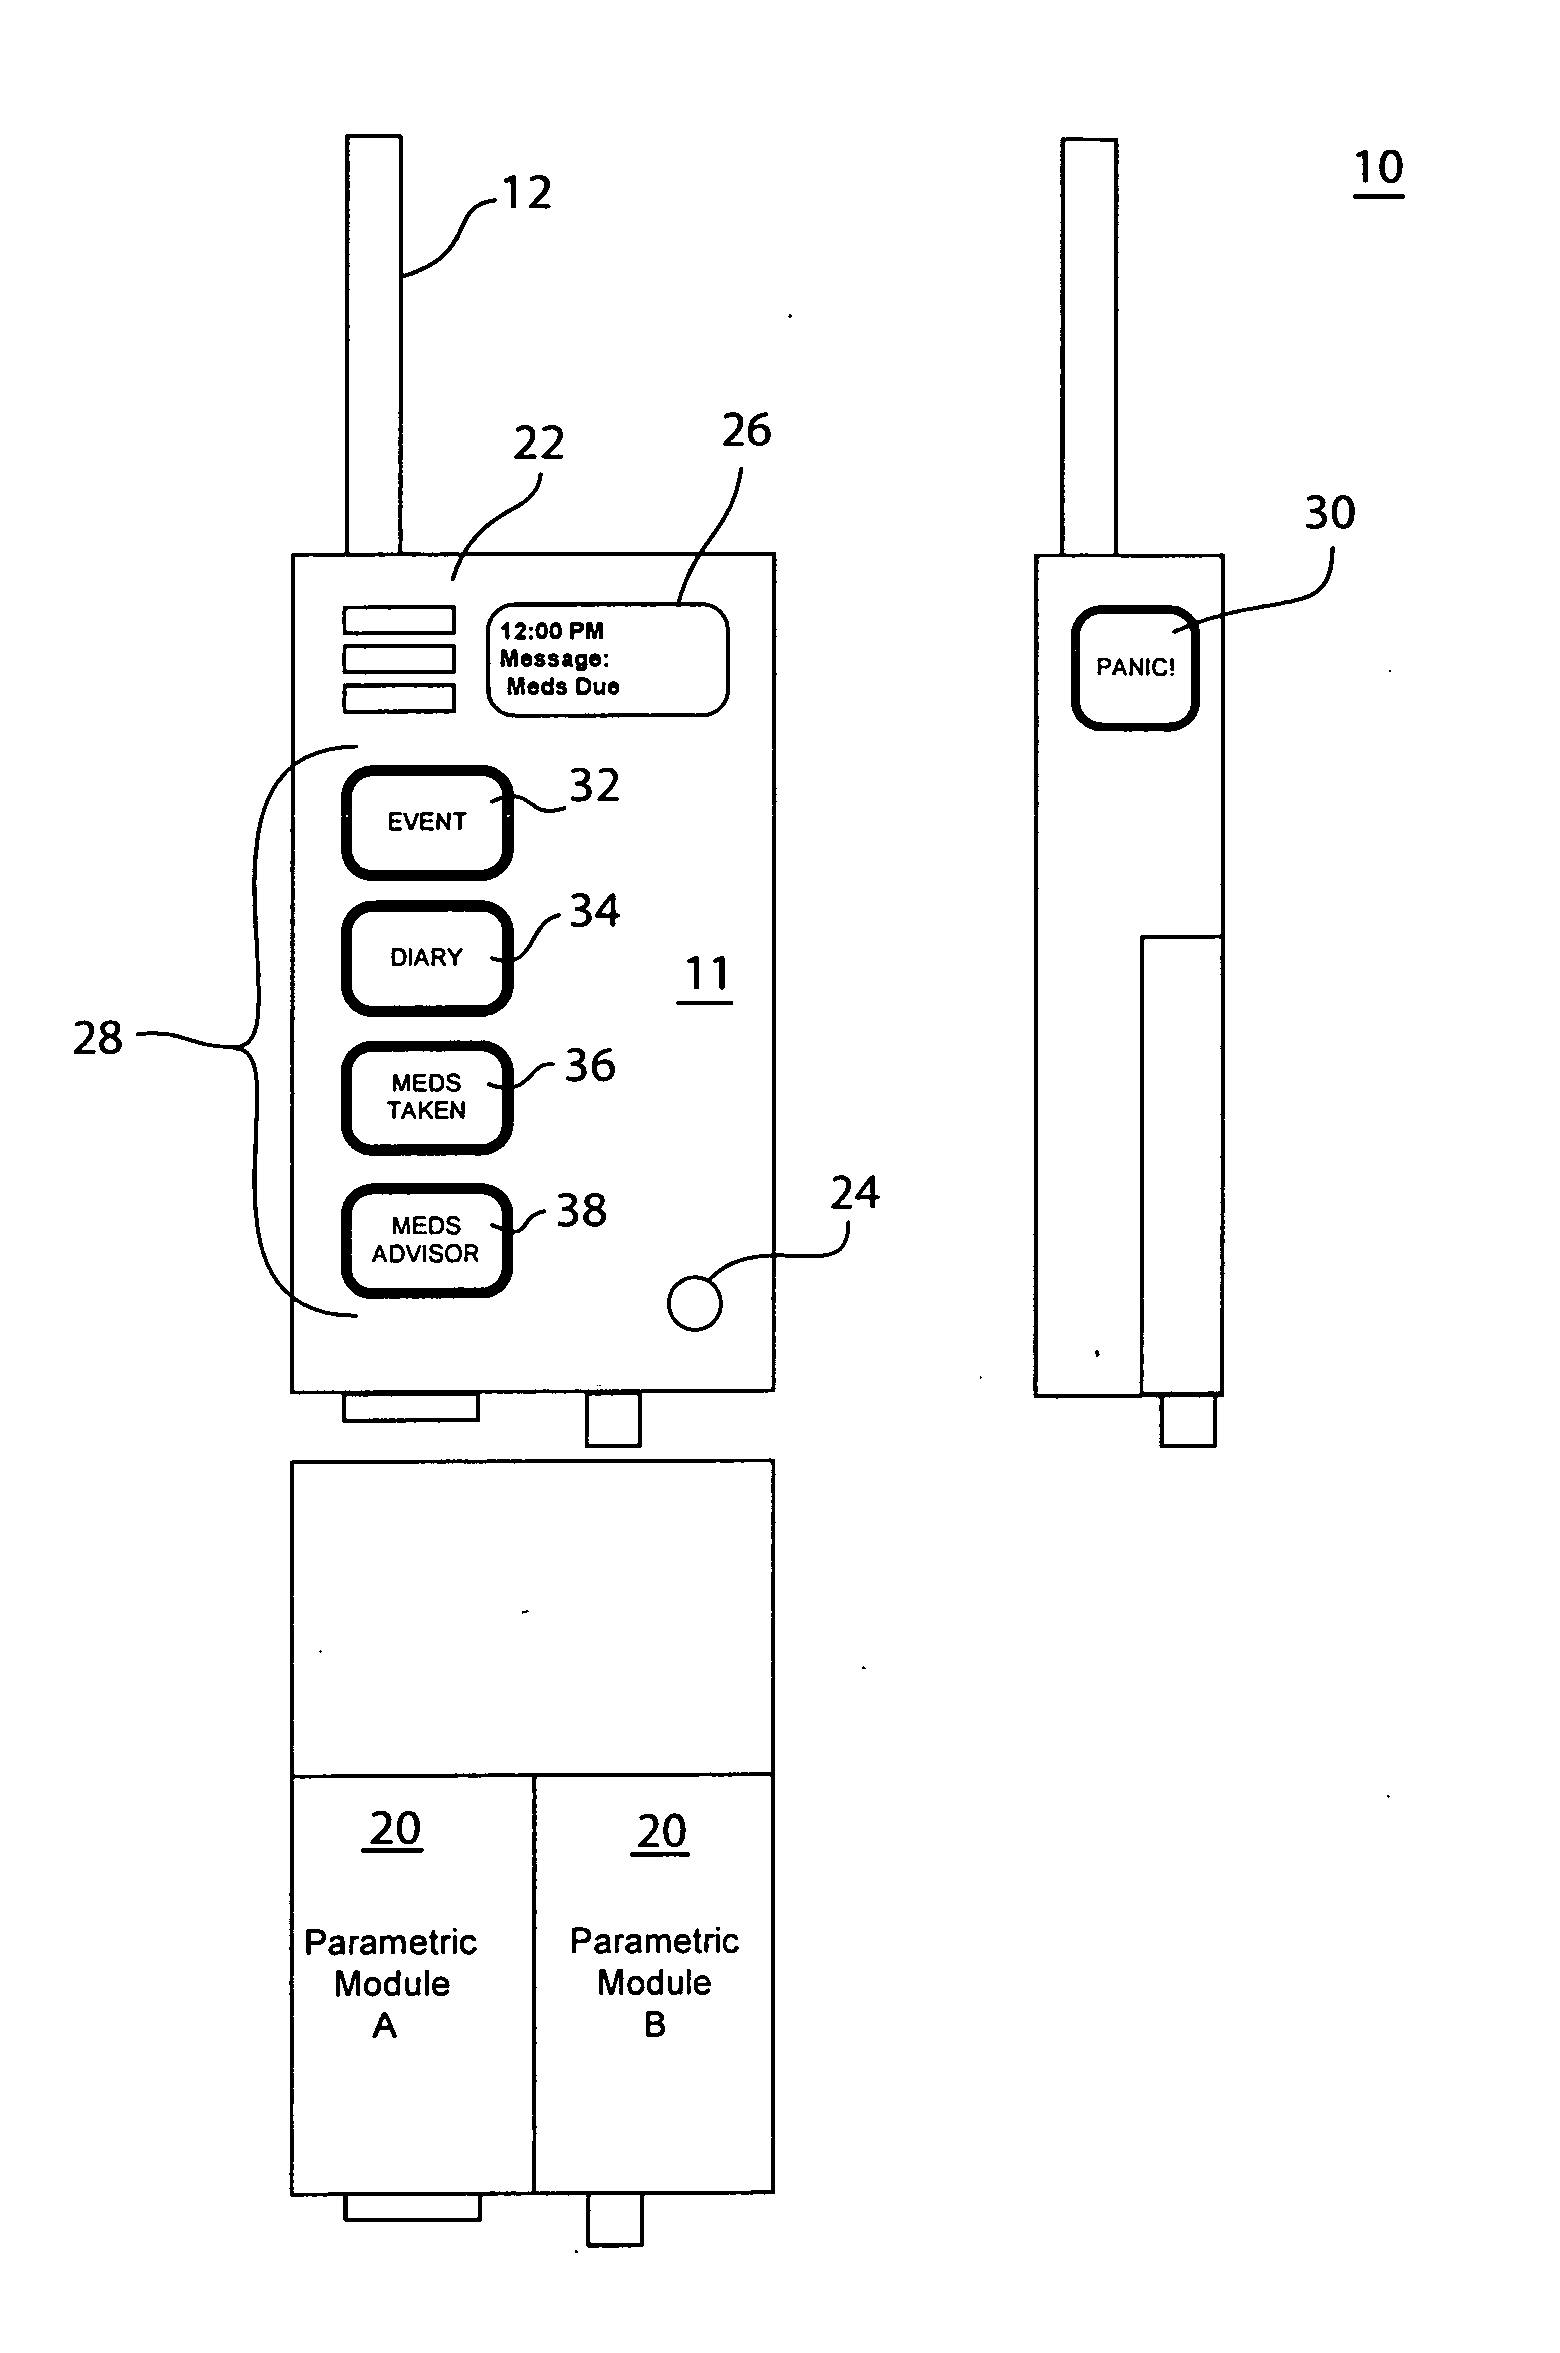 Patient monitoring device for remote patient monitoring